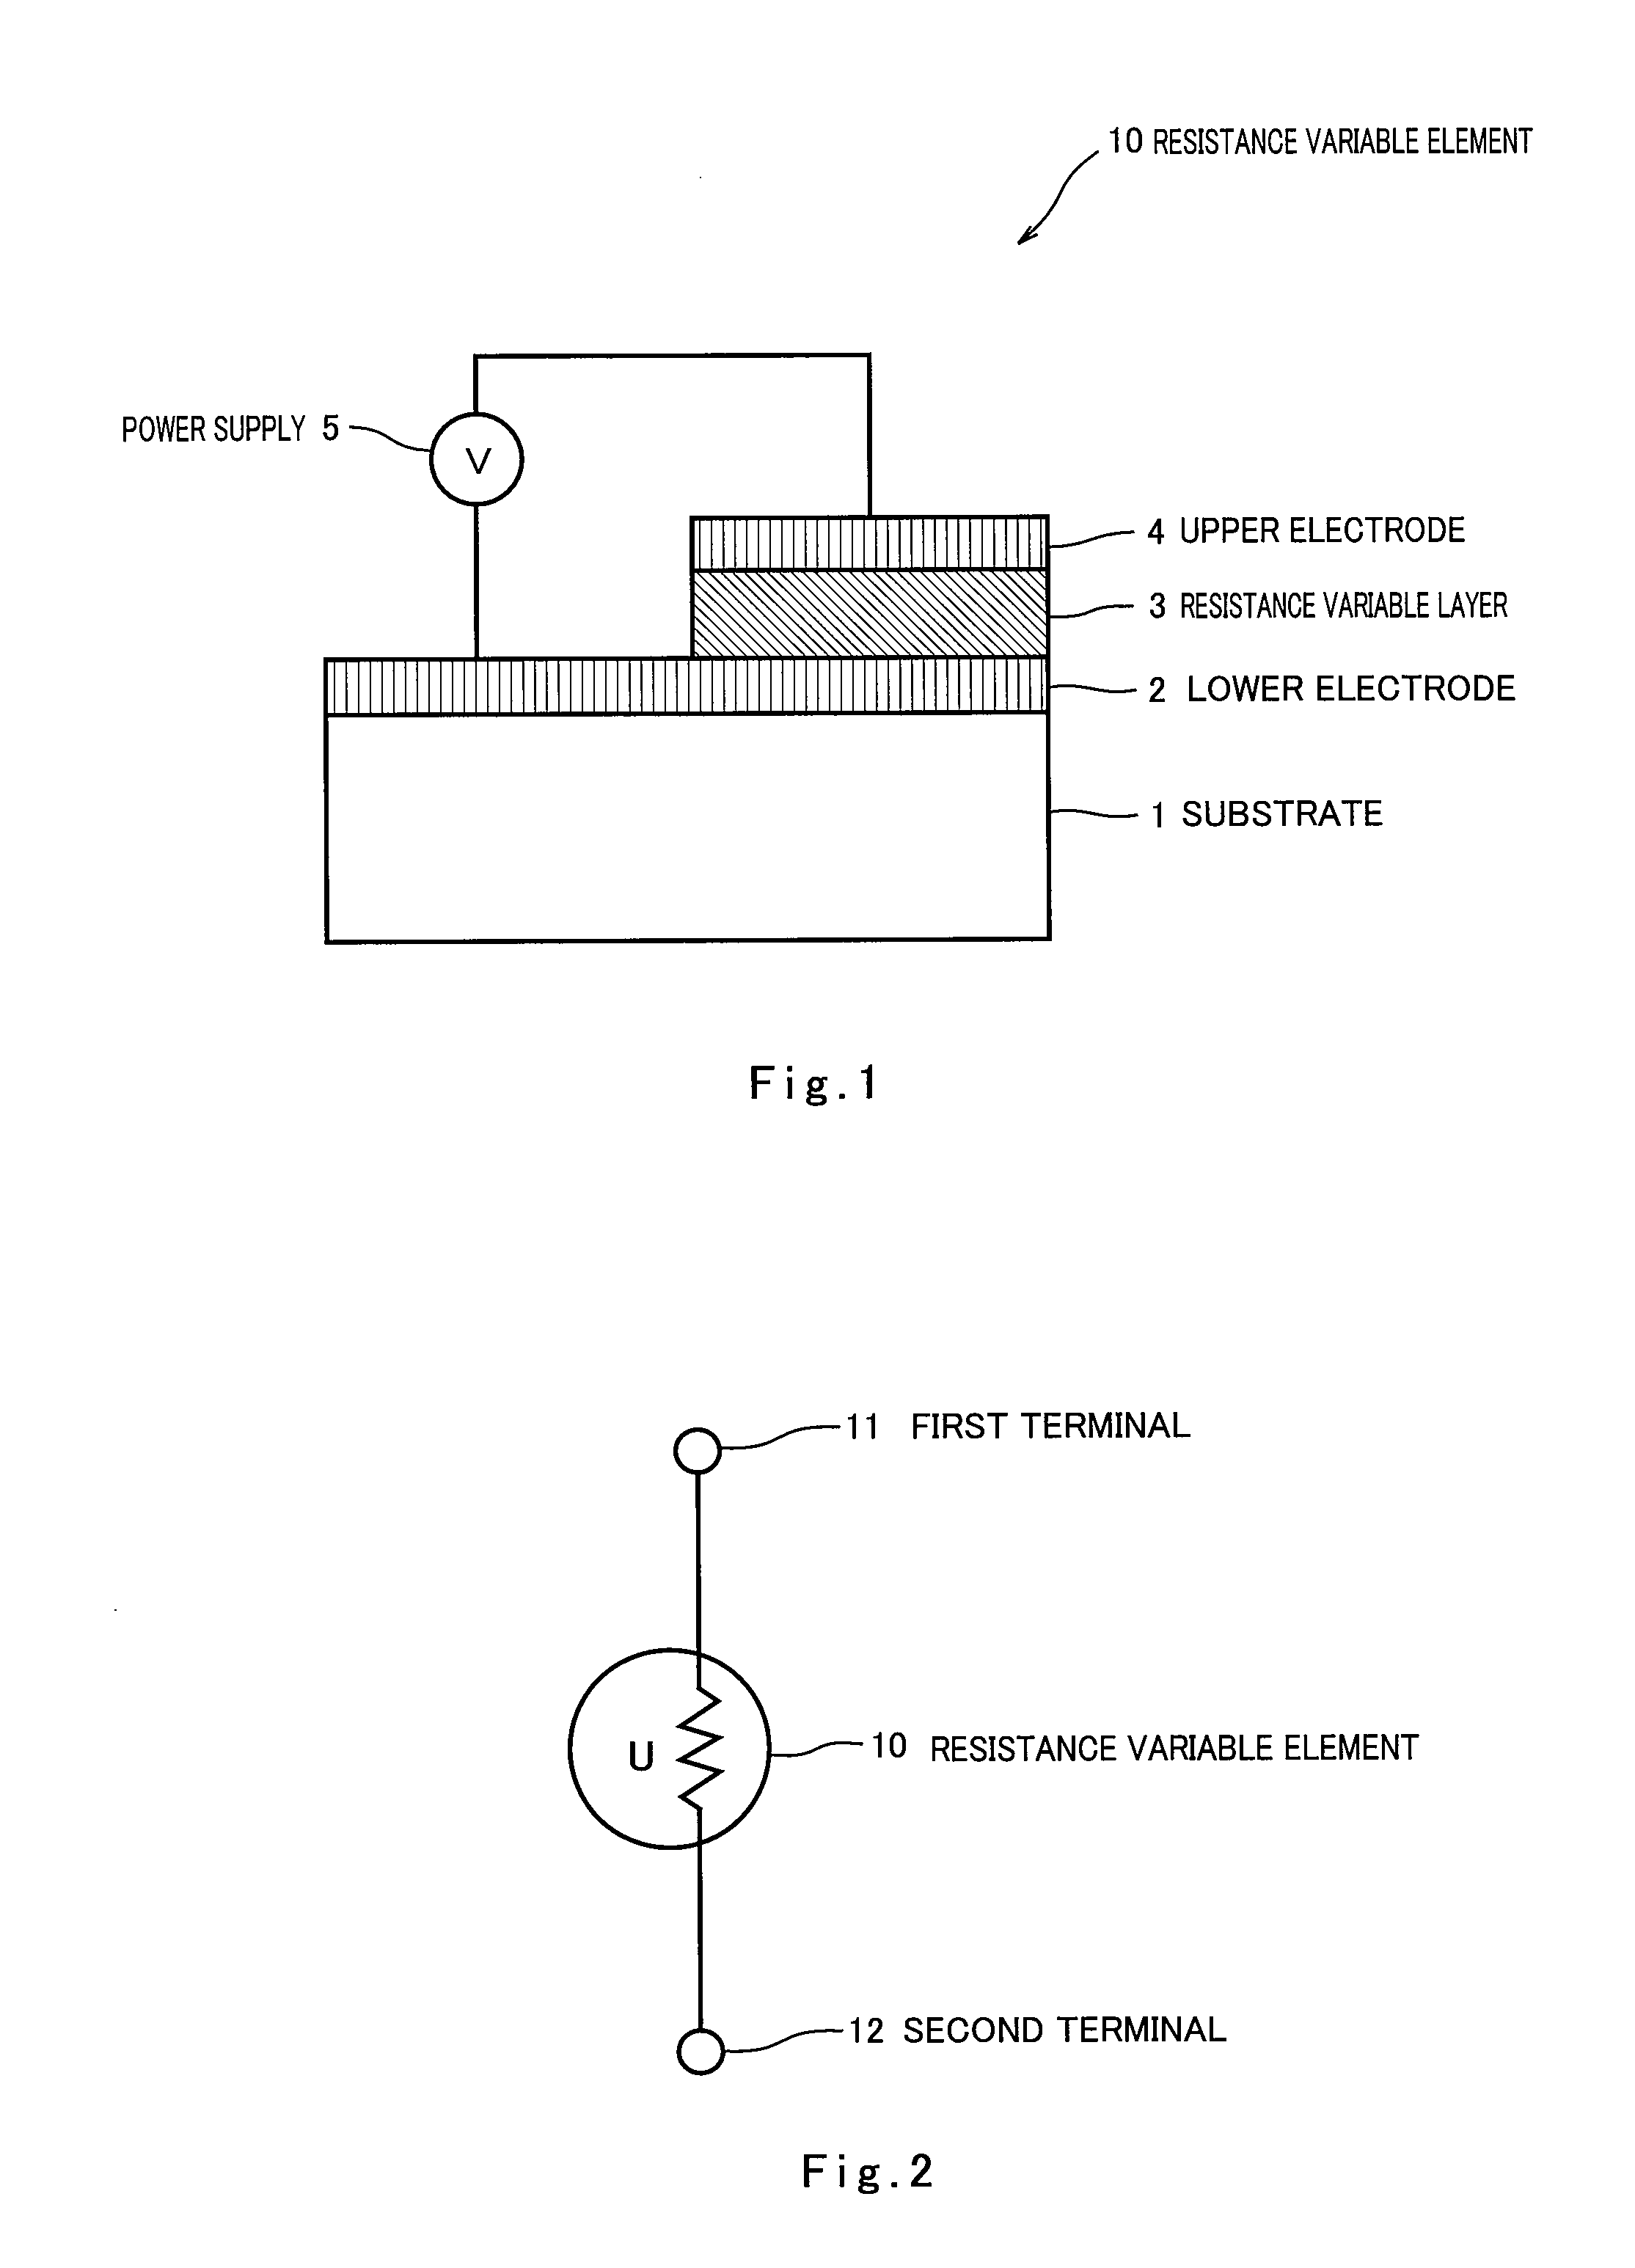 Resistance variable element and resistance variable memory apparatus